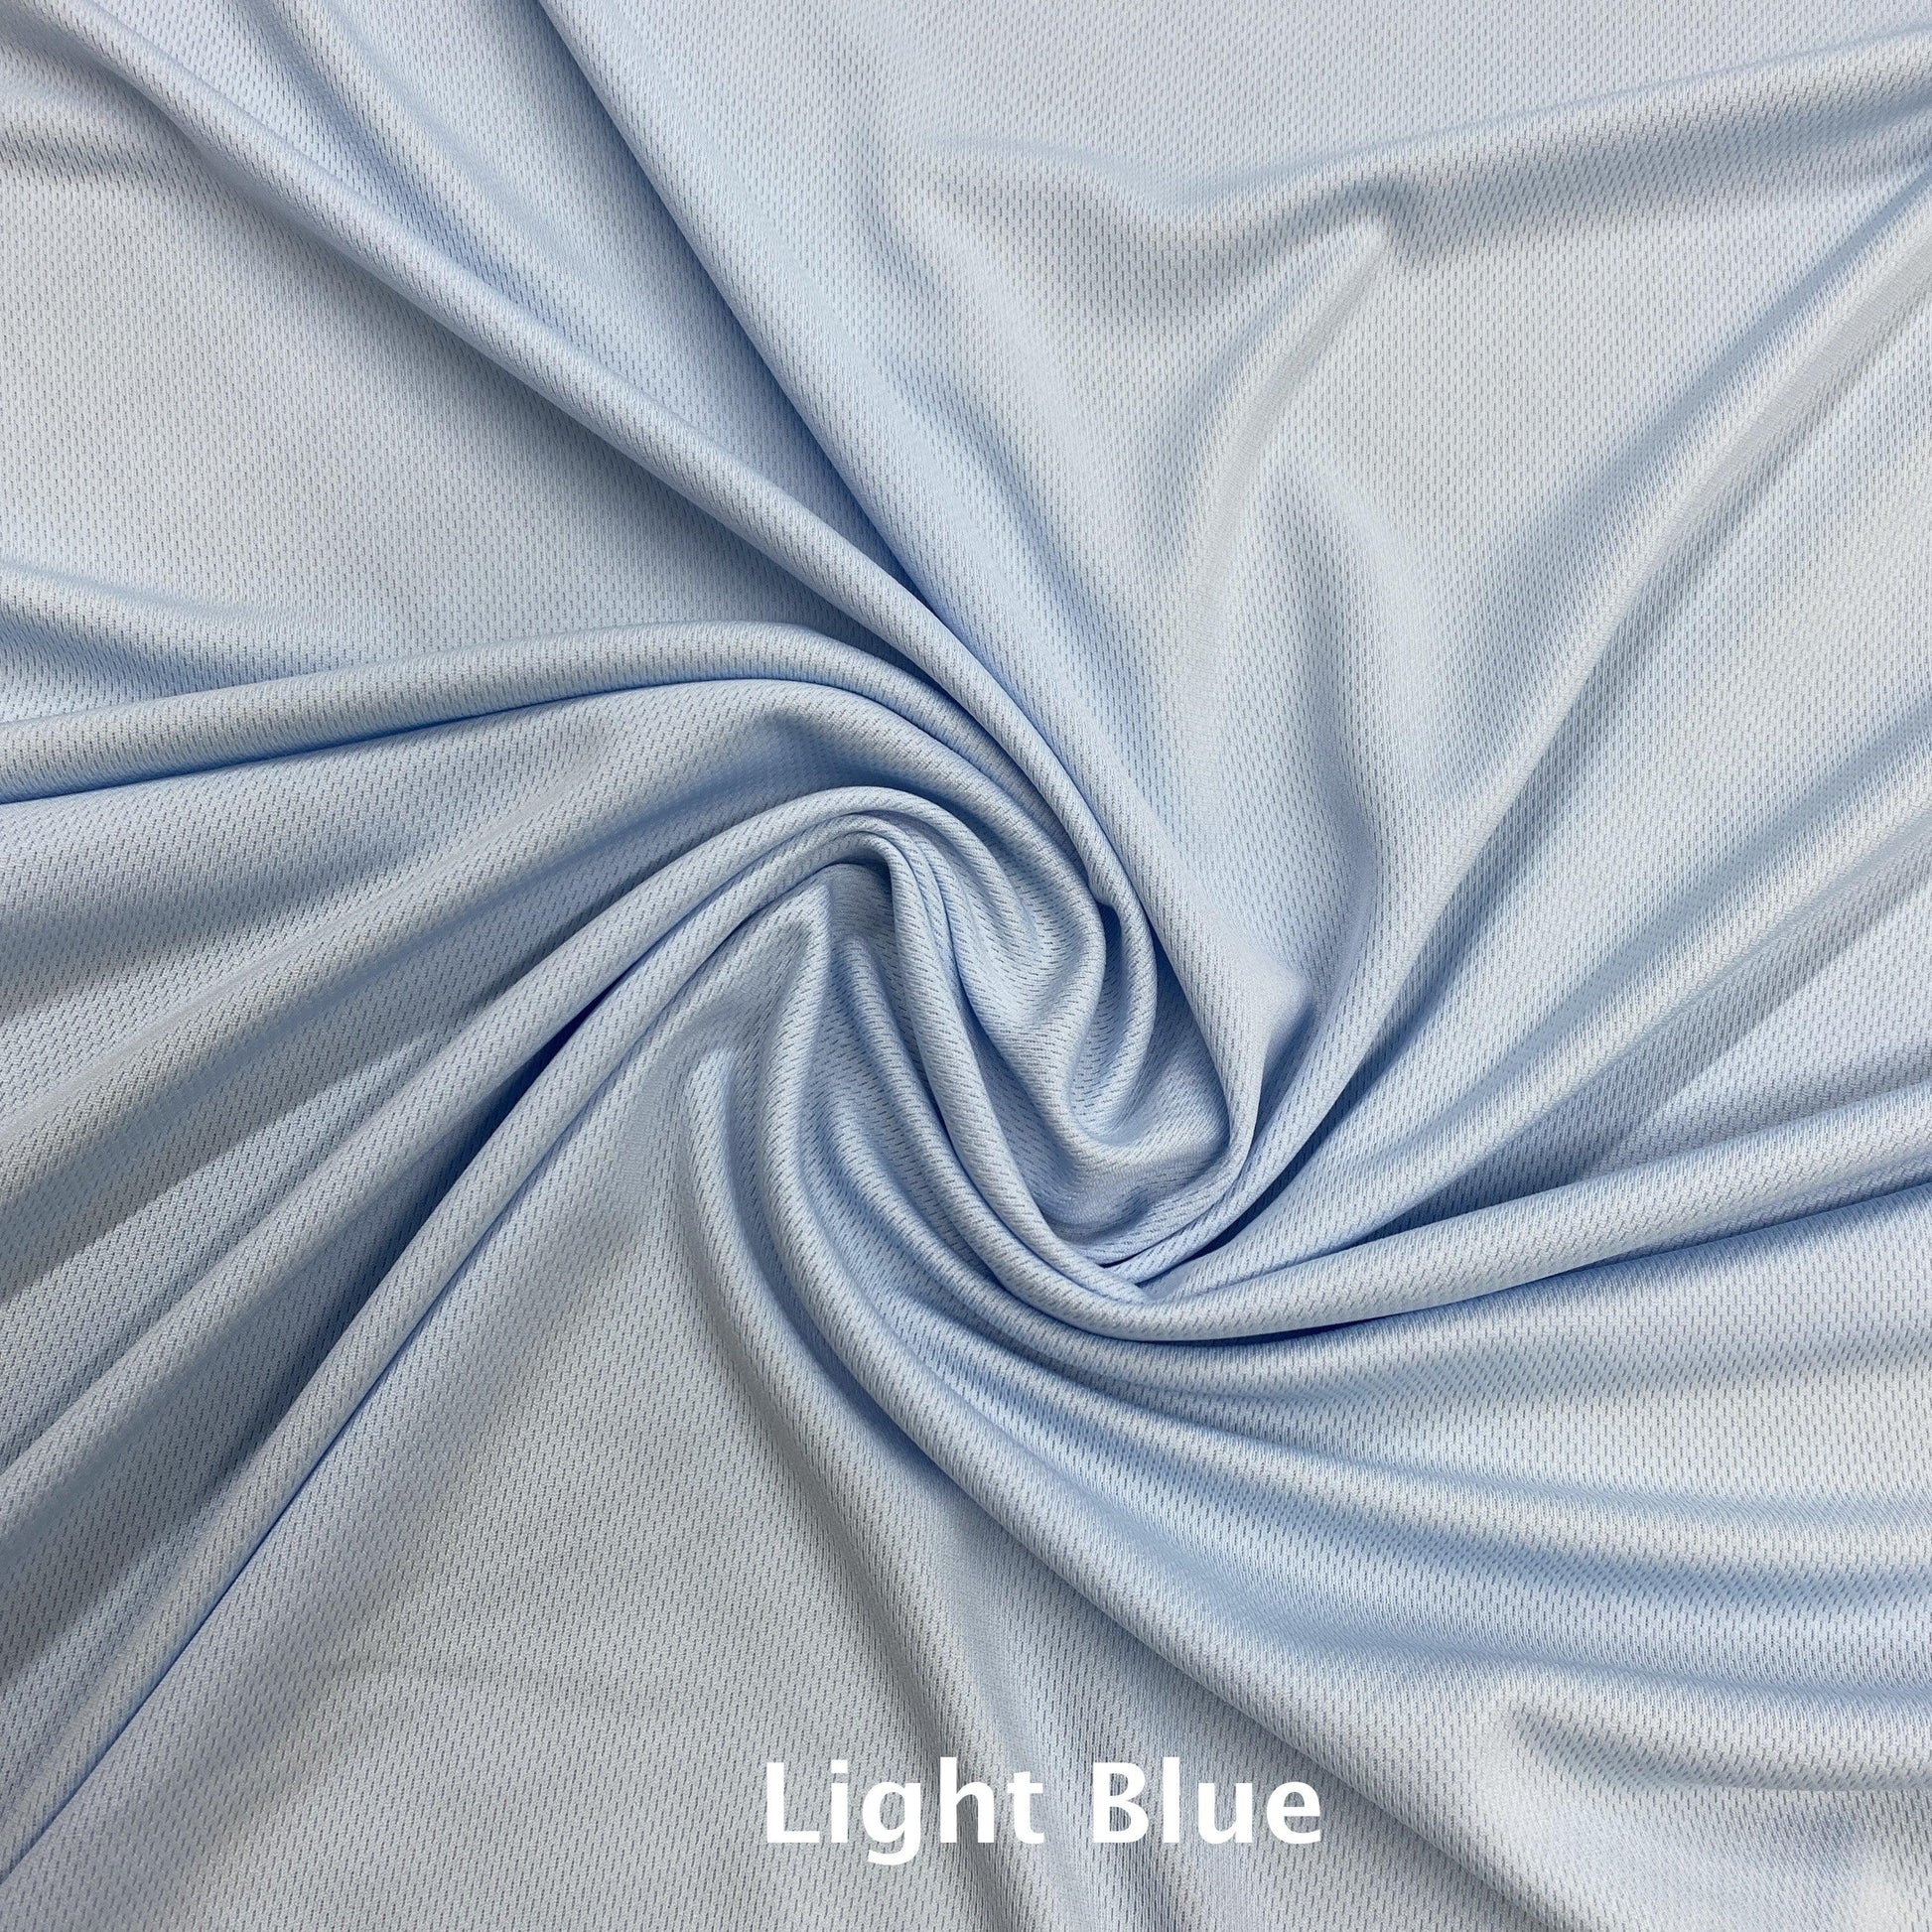 Polyester Athletic Wicking Jersey Fabric, $5.95/yd, 15 Yards - Your Choice  of One Color